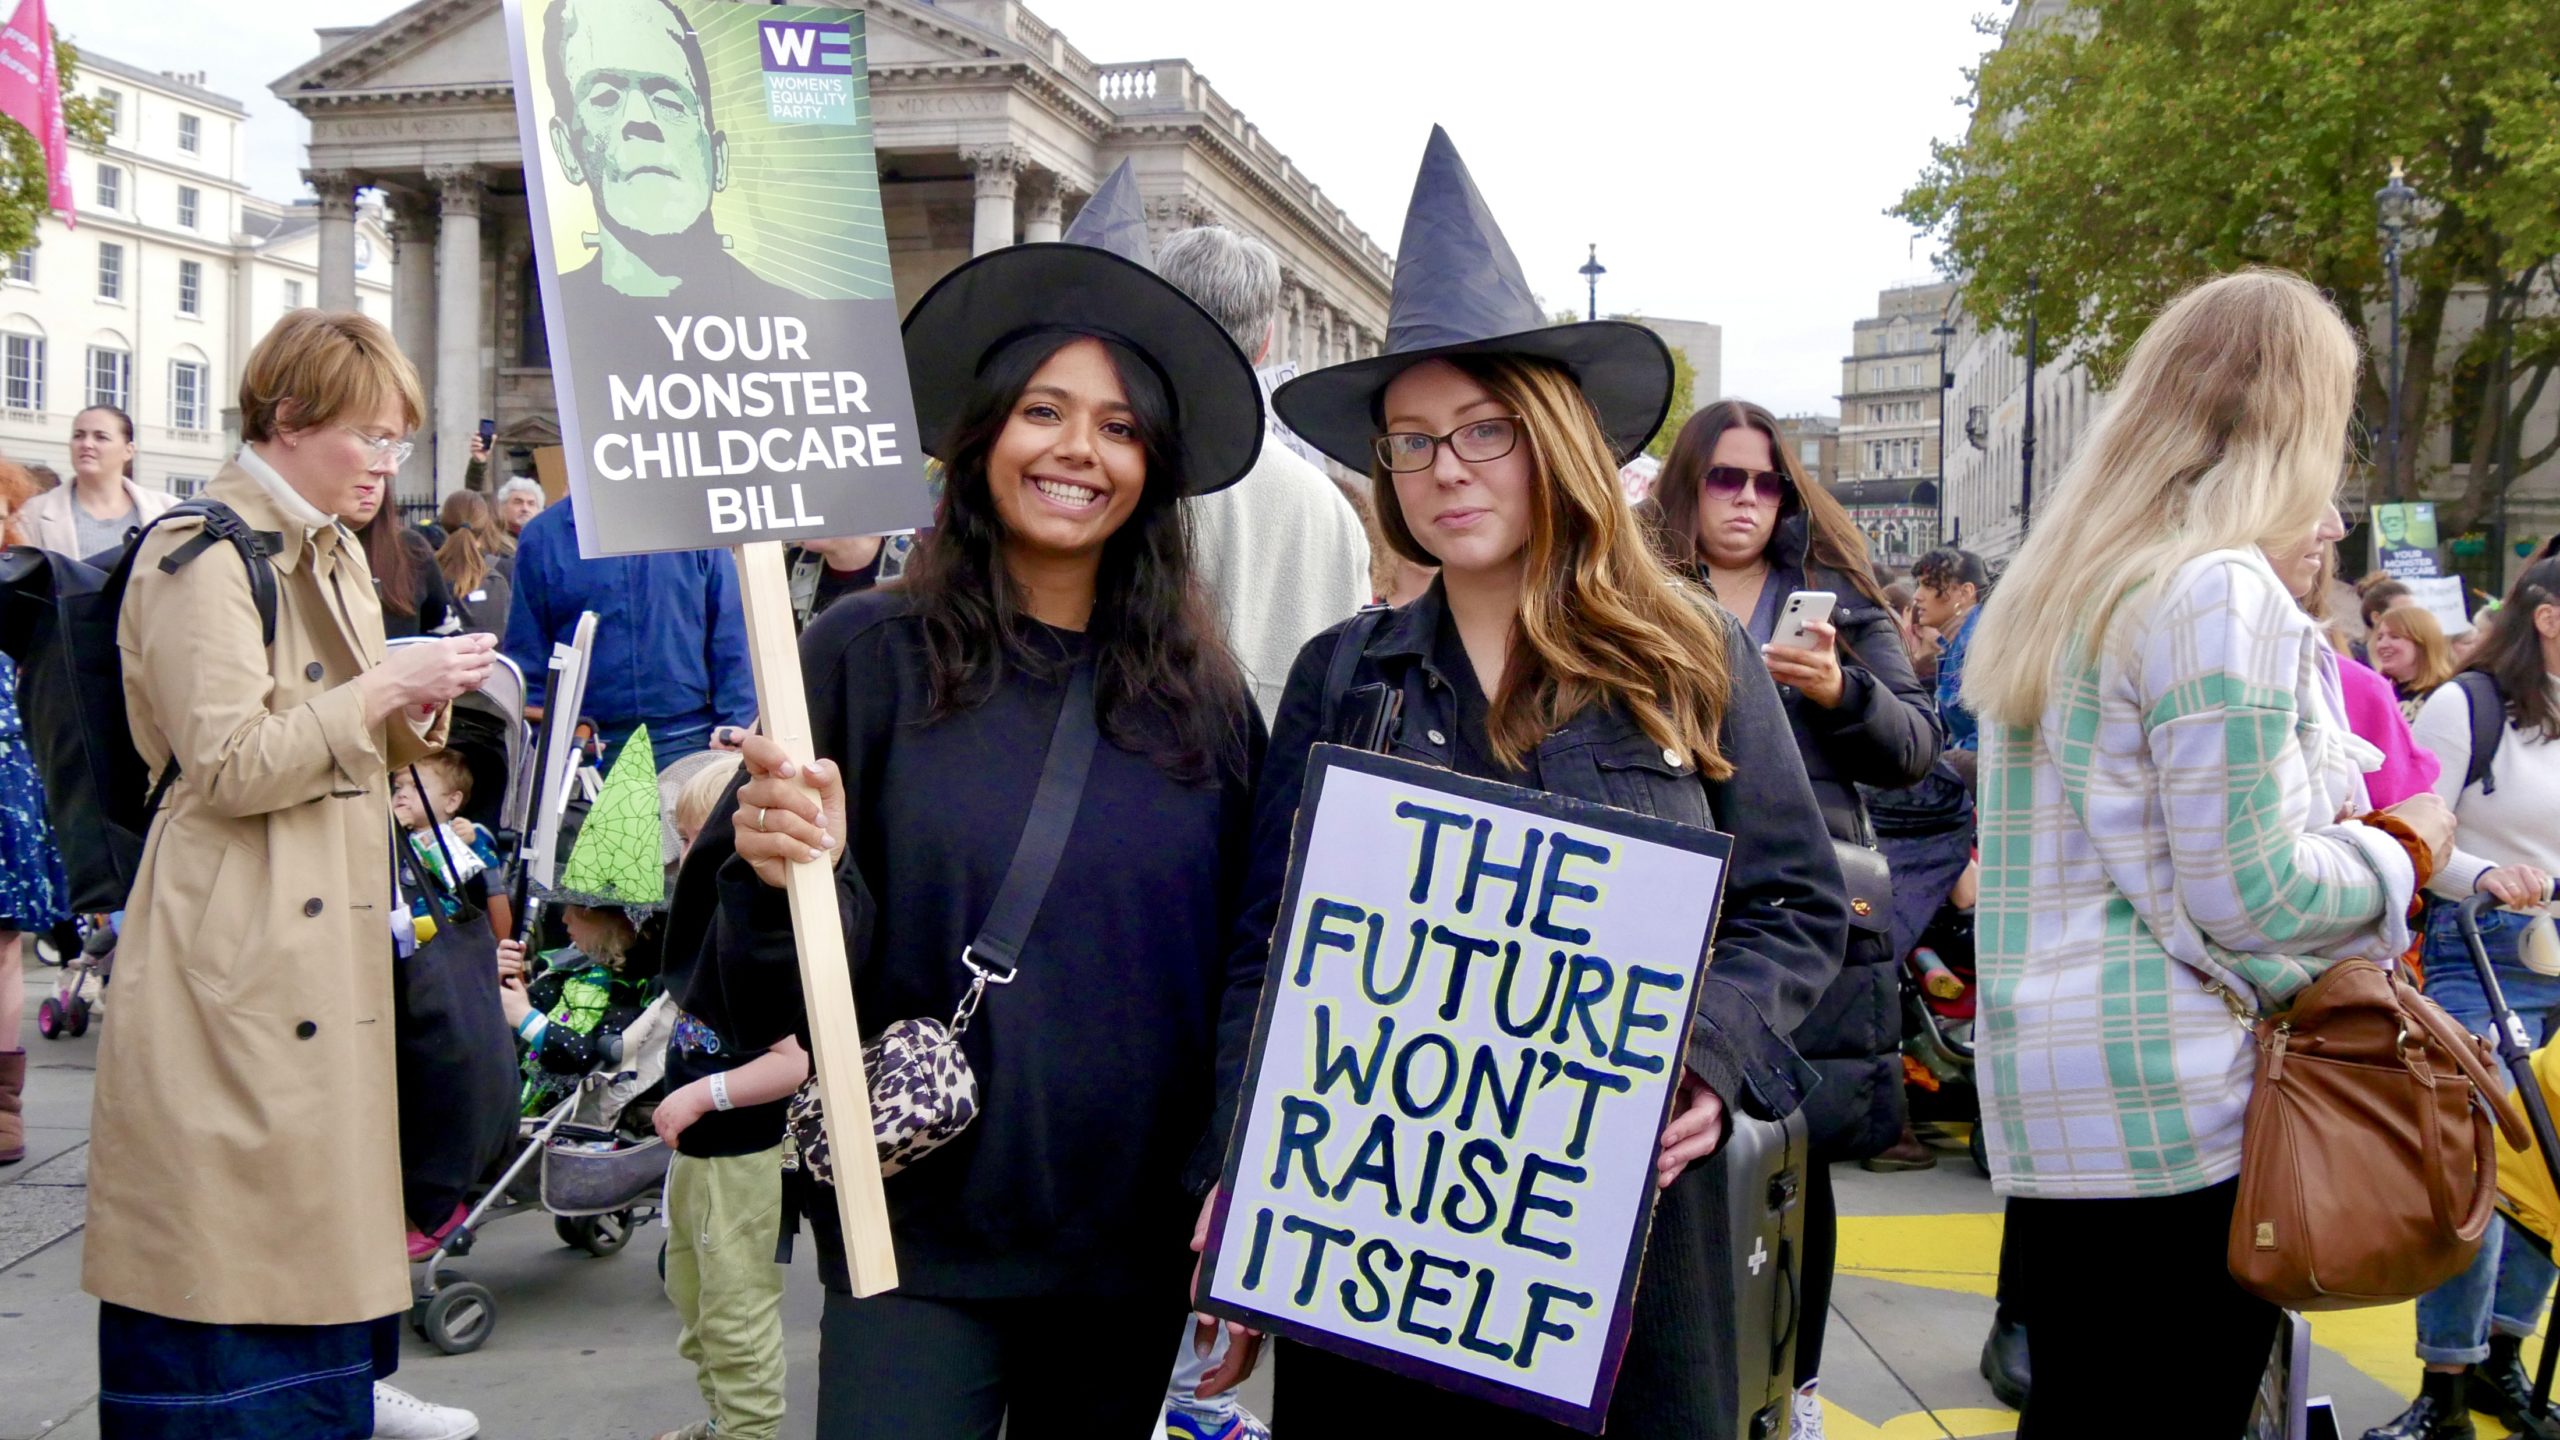 Two mothers in witch costumes hold sign: 'The future won't raise itself'